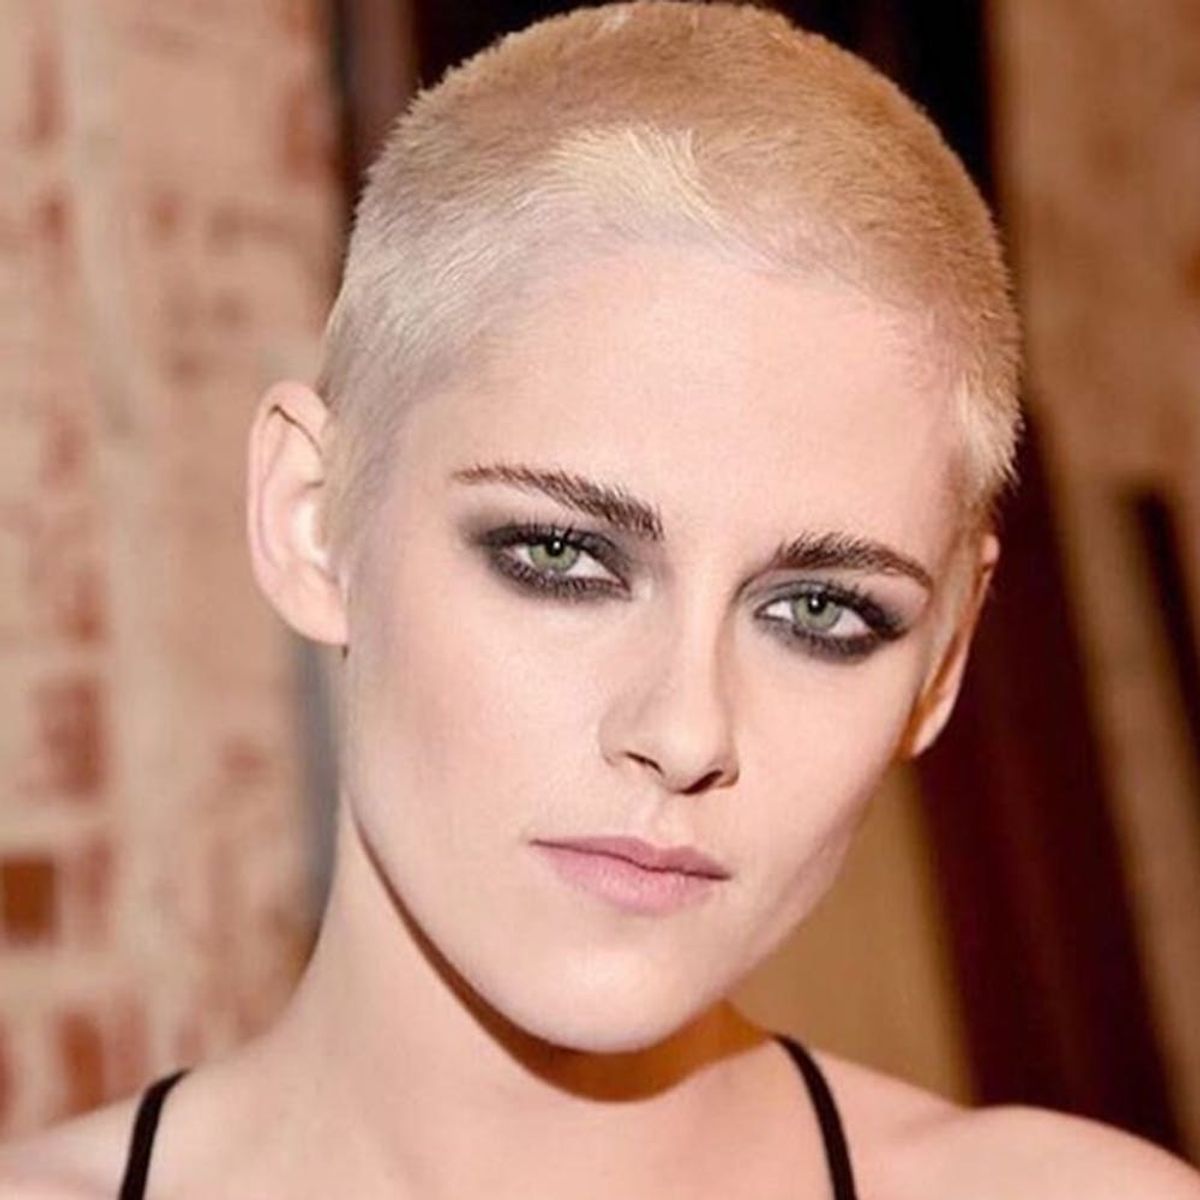 Kristen Stewart Debuts Shaved Blonde Hairstyle on the Red Carpet